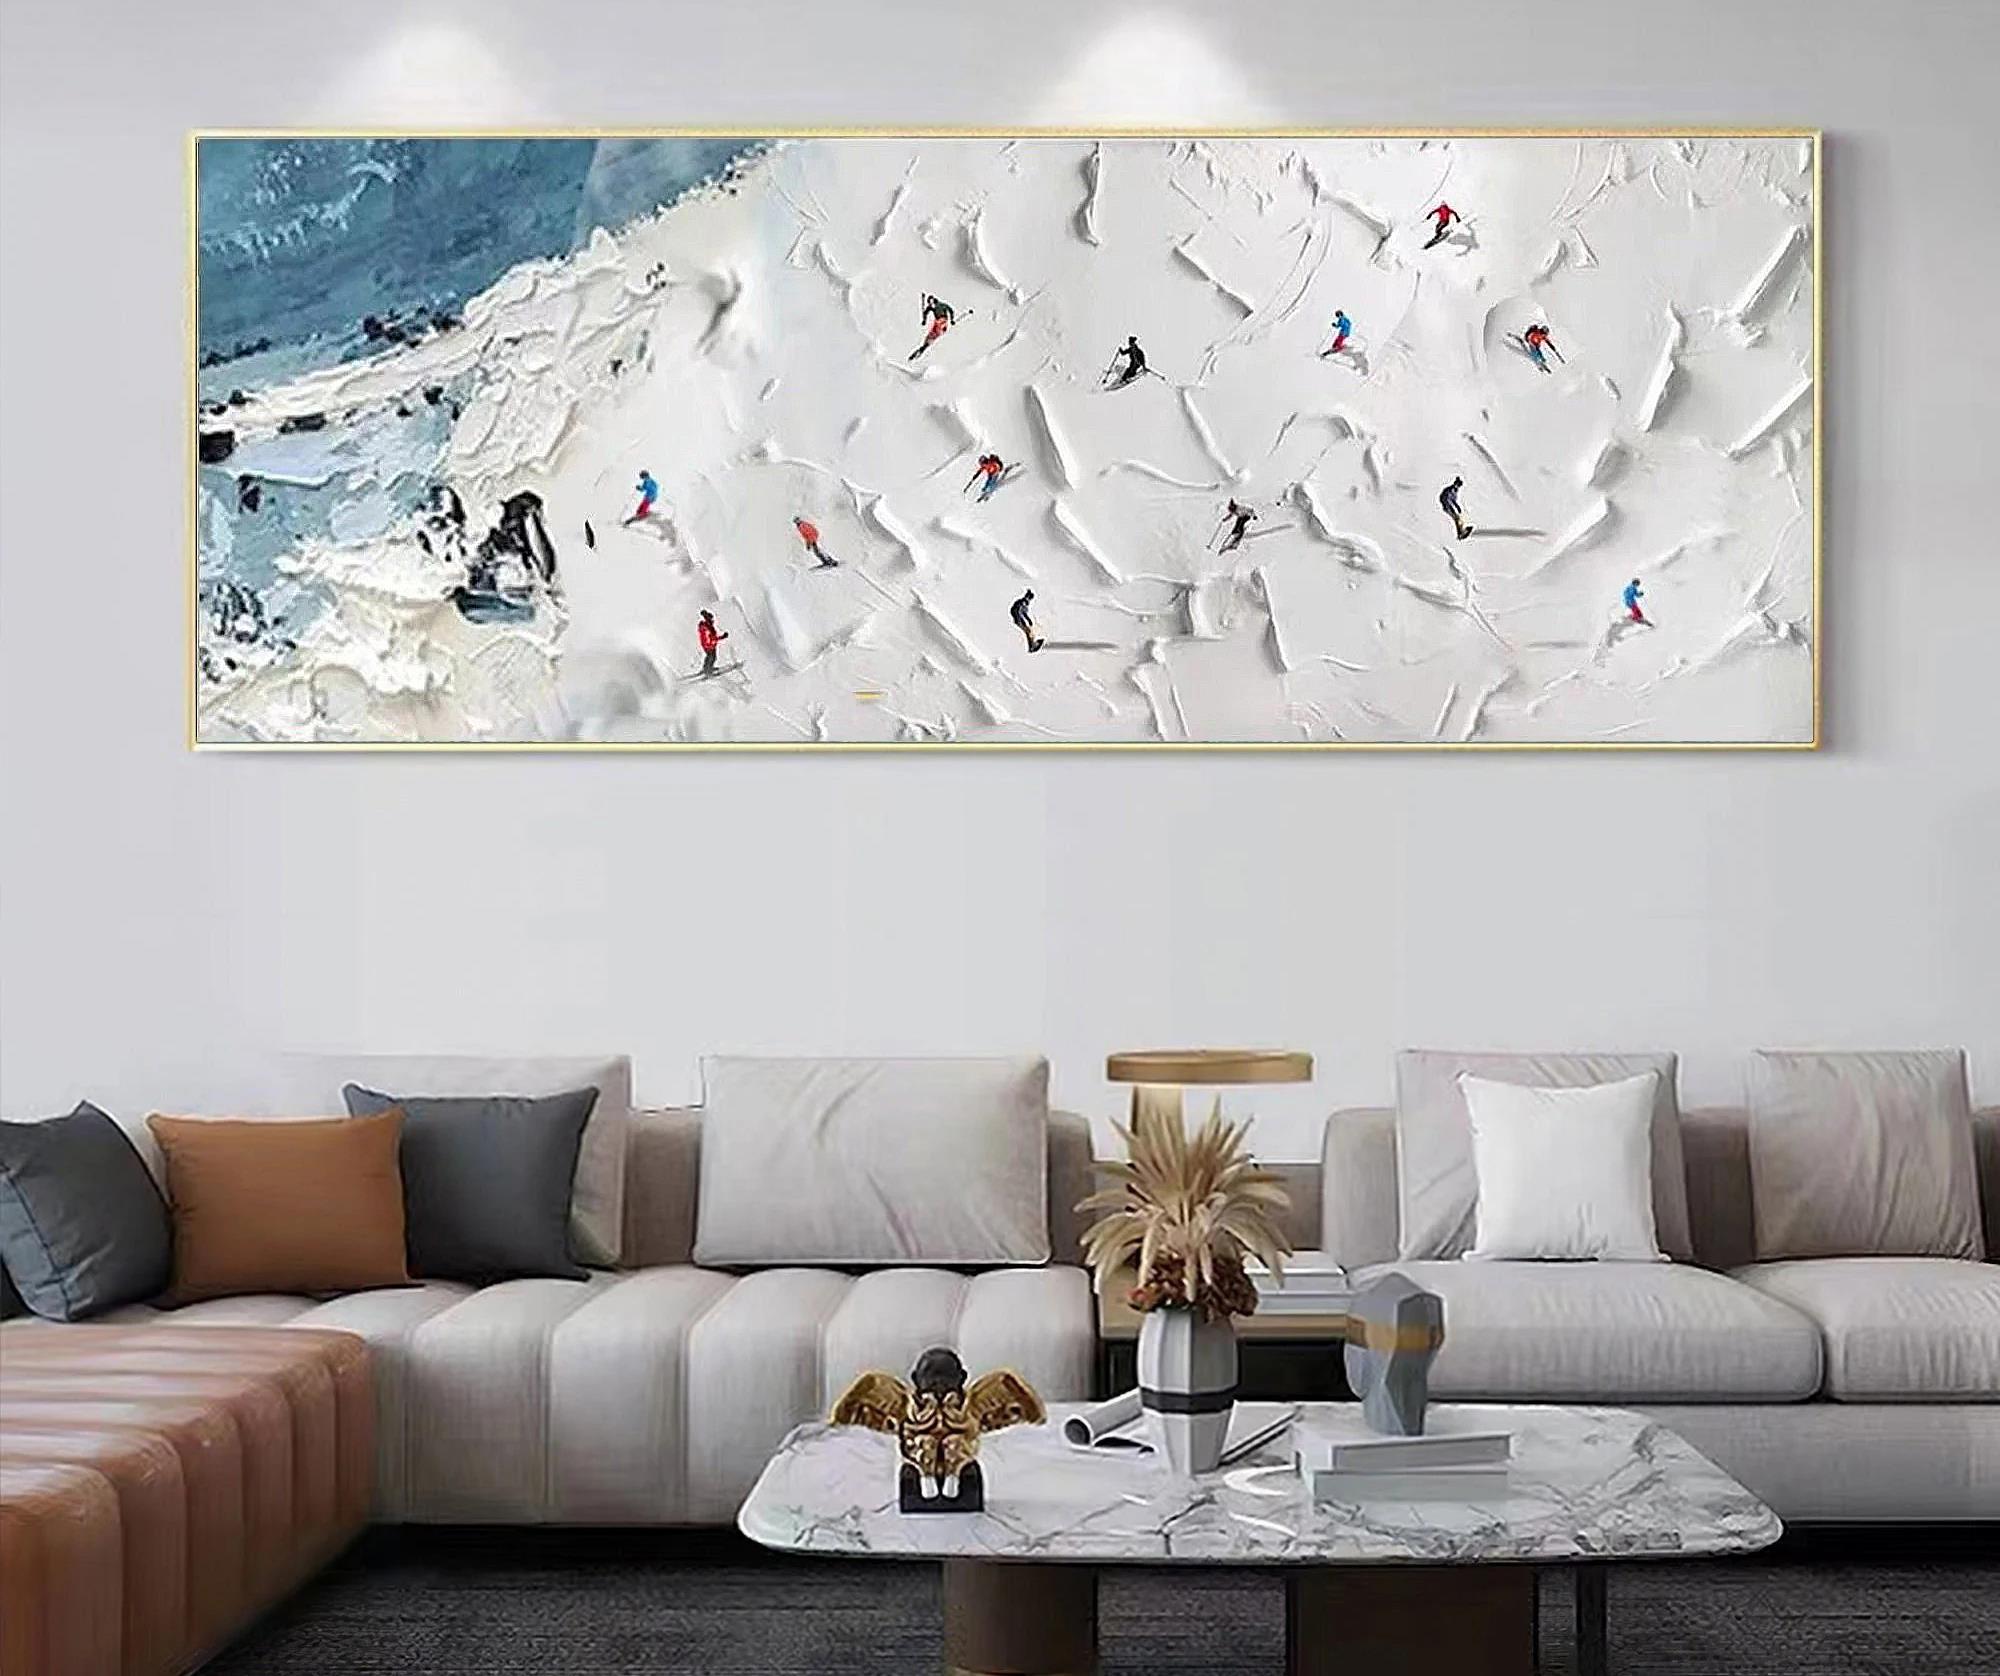 Skier on Snowy Mountain Wall Art Sport White Snow Skiing Room Decor by Knife 05 Oil Paintings